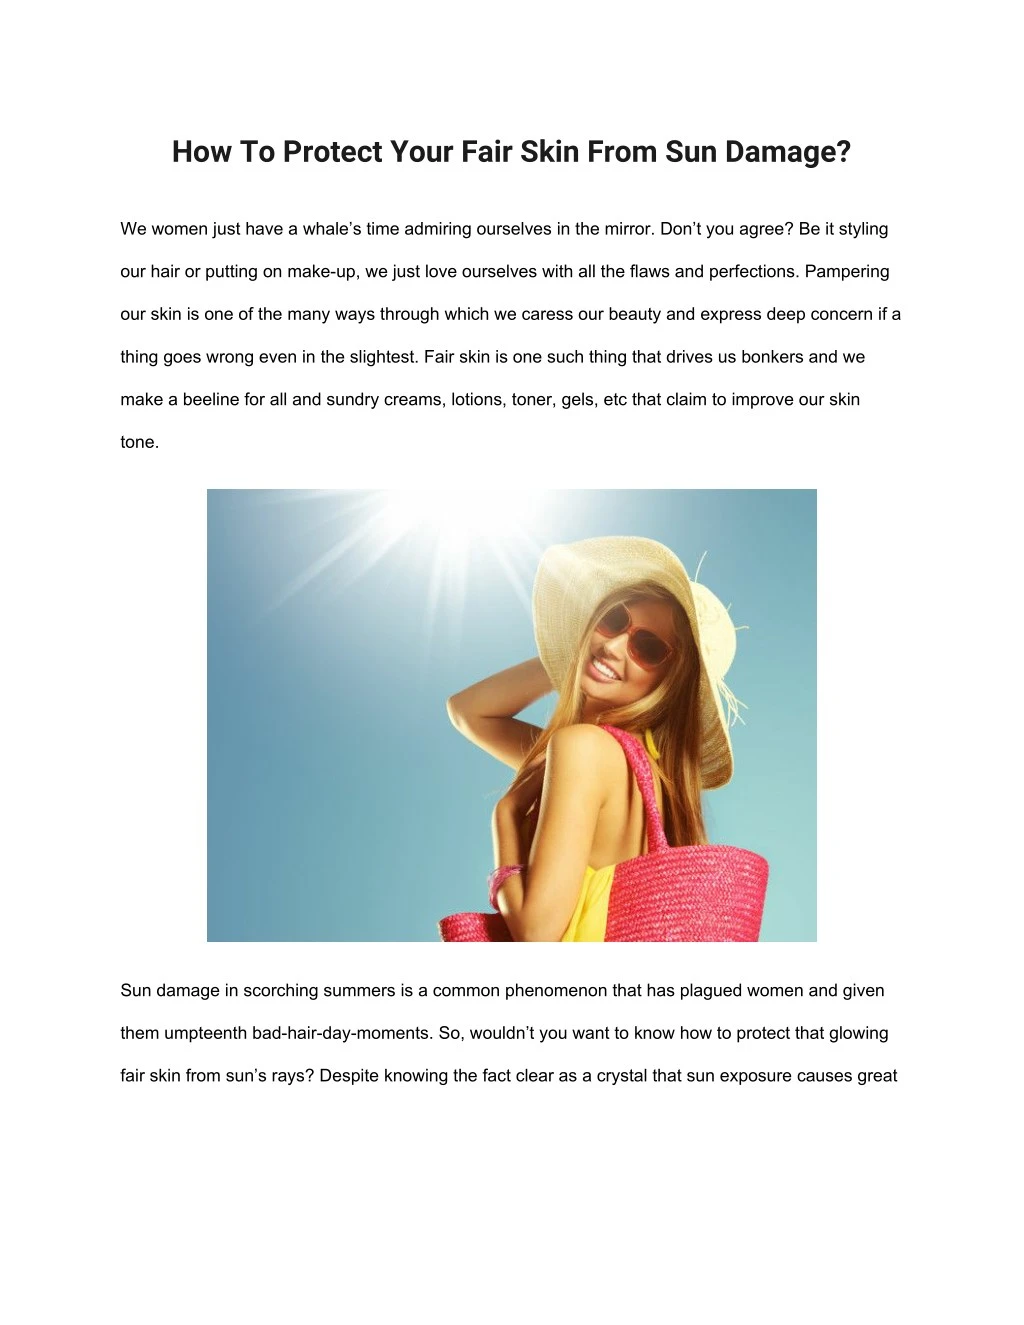 how to protect your fair skin from sun damage